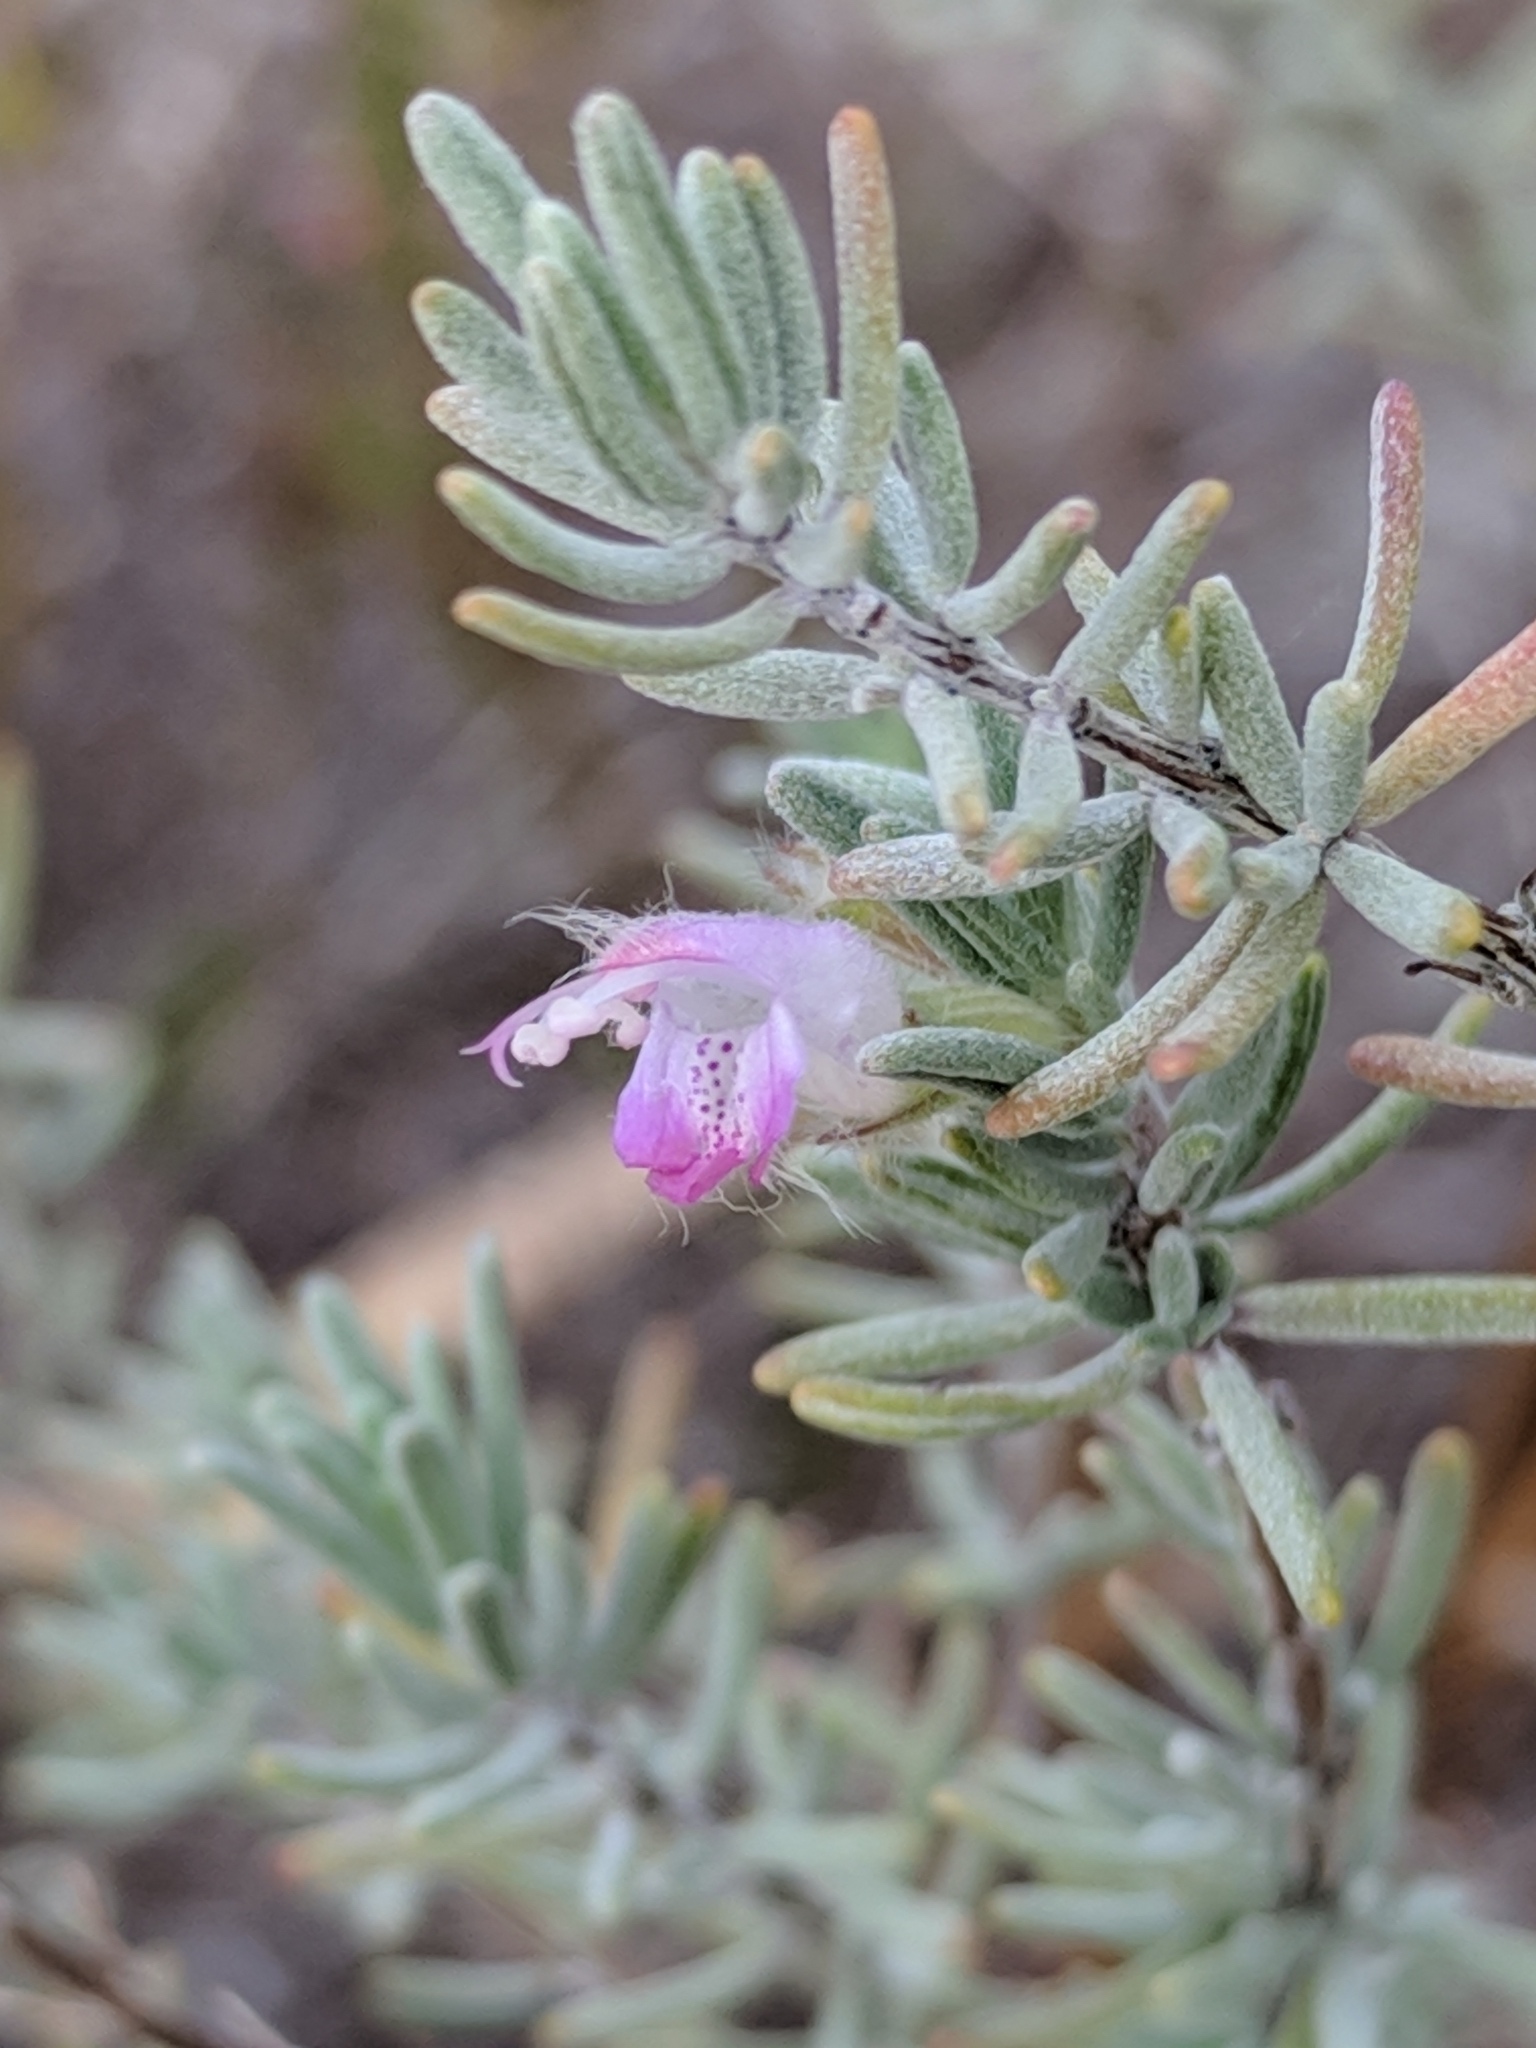 The Scientific Name is Conradina canescens. You will likely hear them called Gray Rosemary, False Rosemary, Woolly Rosemary, Blue-sage. This picture shows the Flowers are purplish-white and two-lipped with the lower lip being three-lobed with dark purple spots. of Conradina canescens